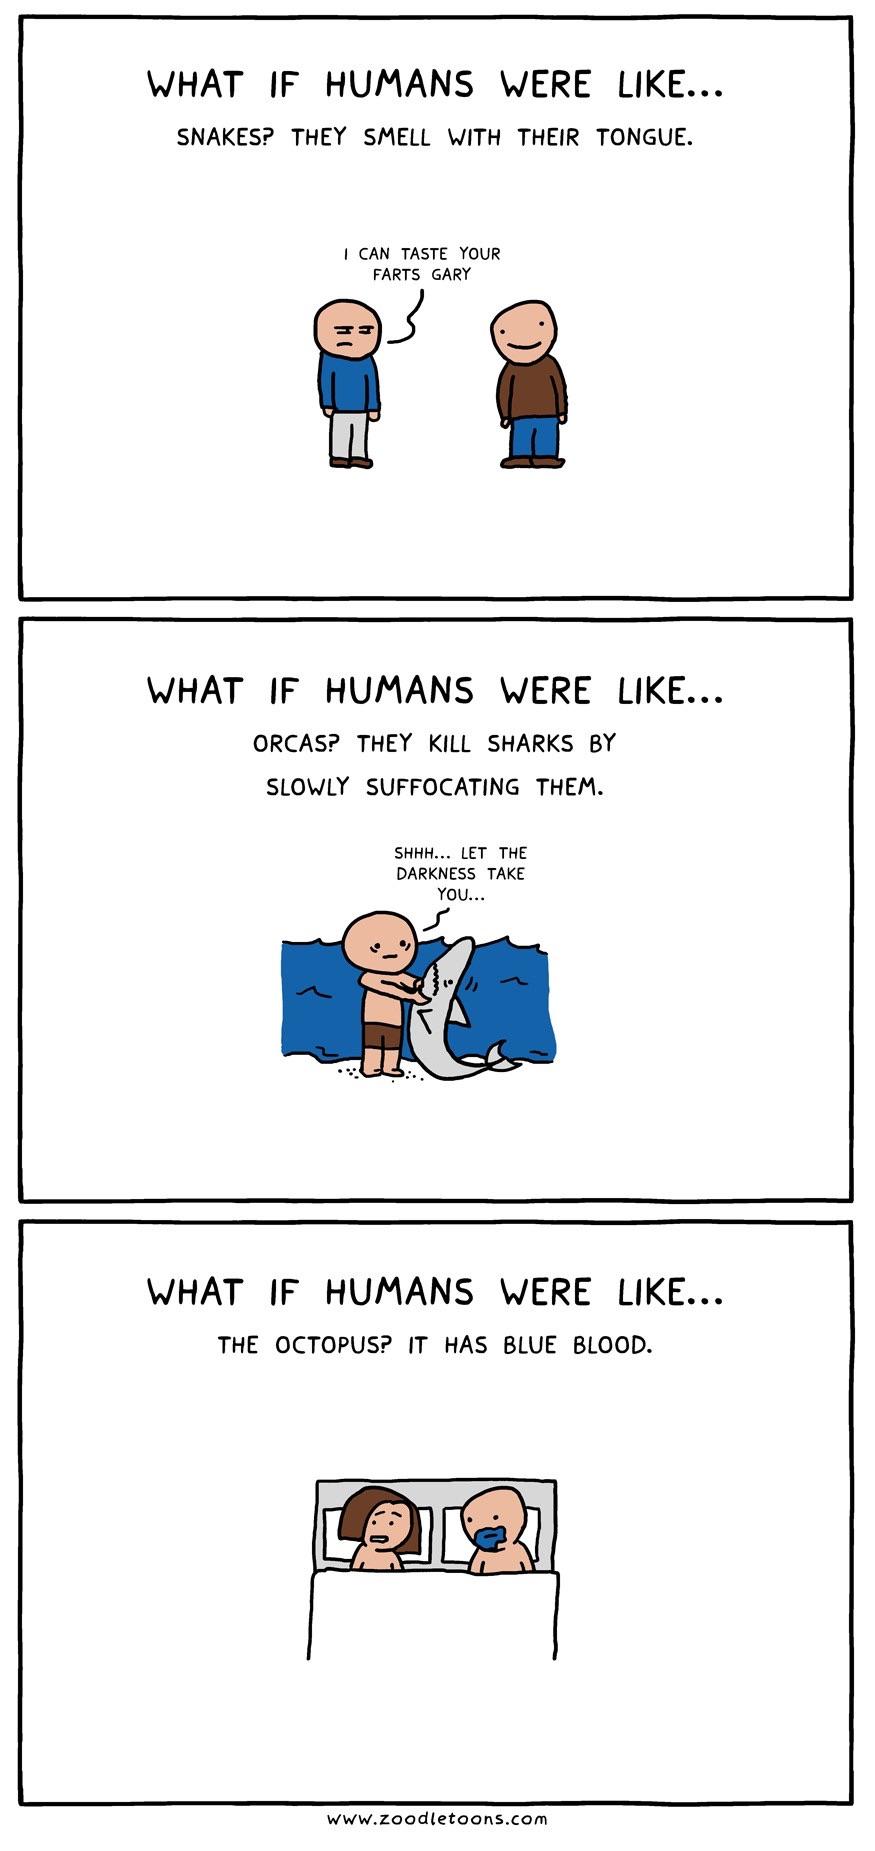 What if Humans Were More Like...